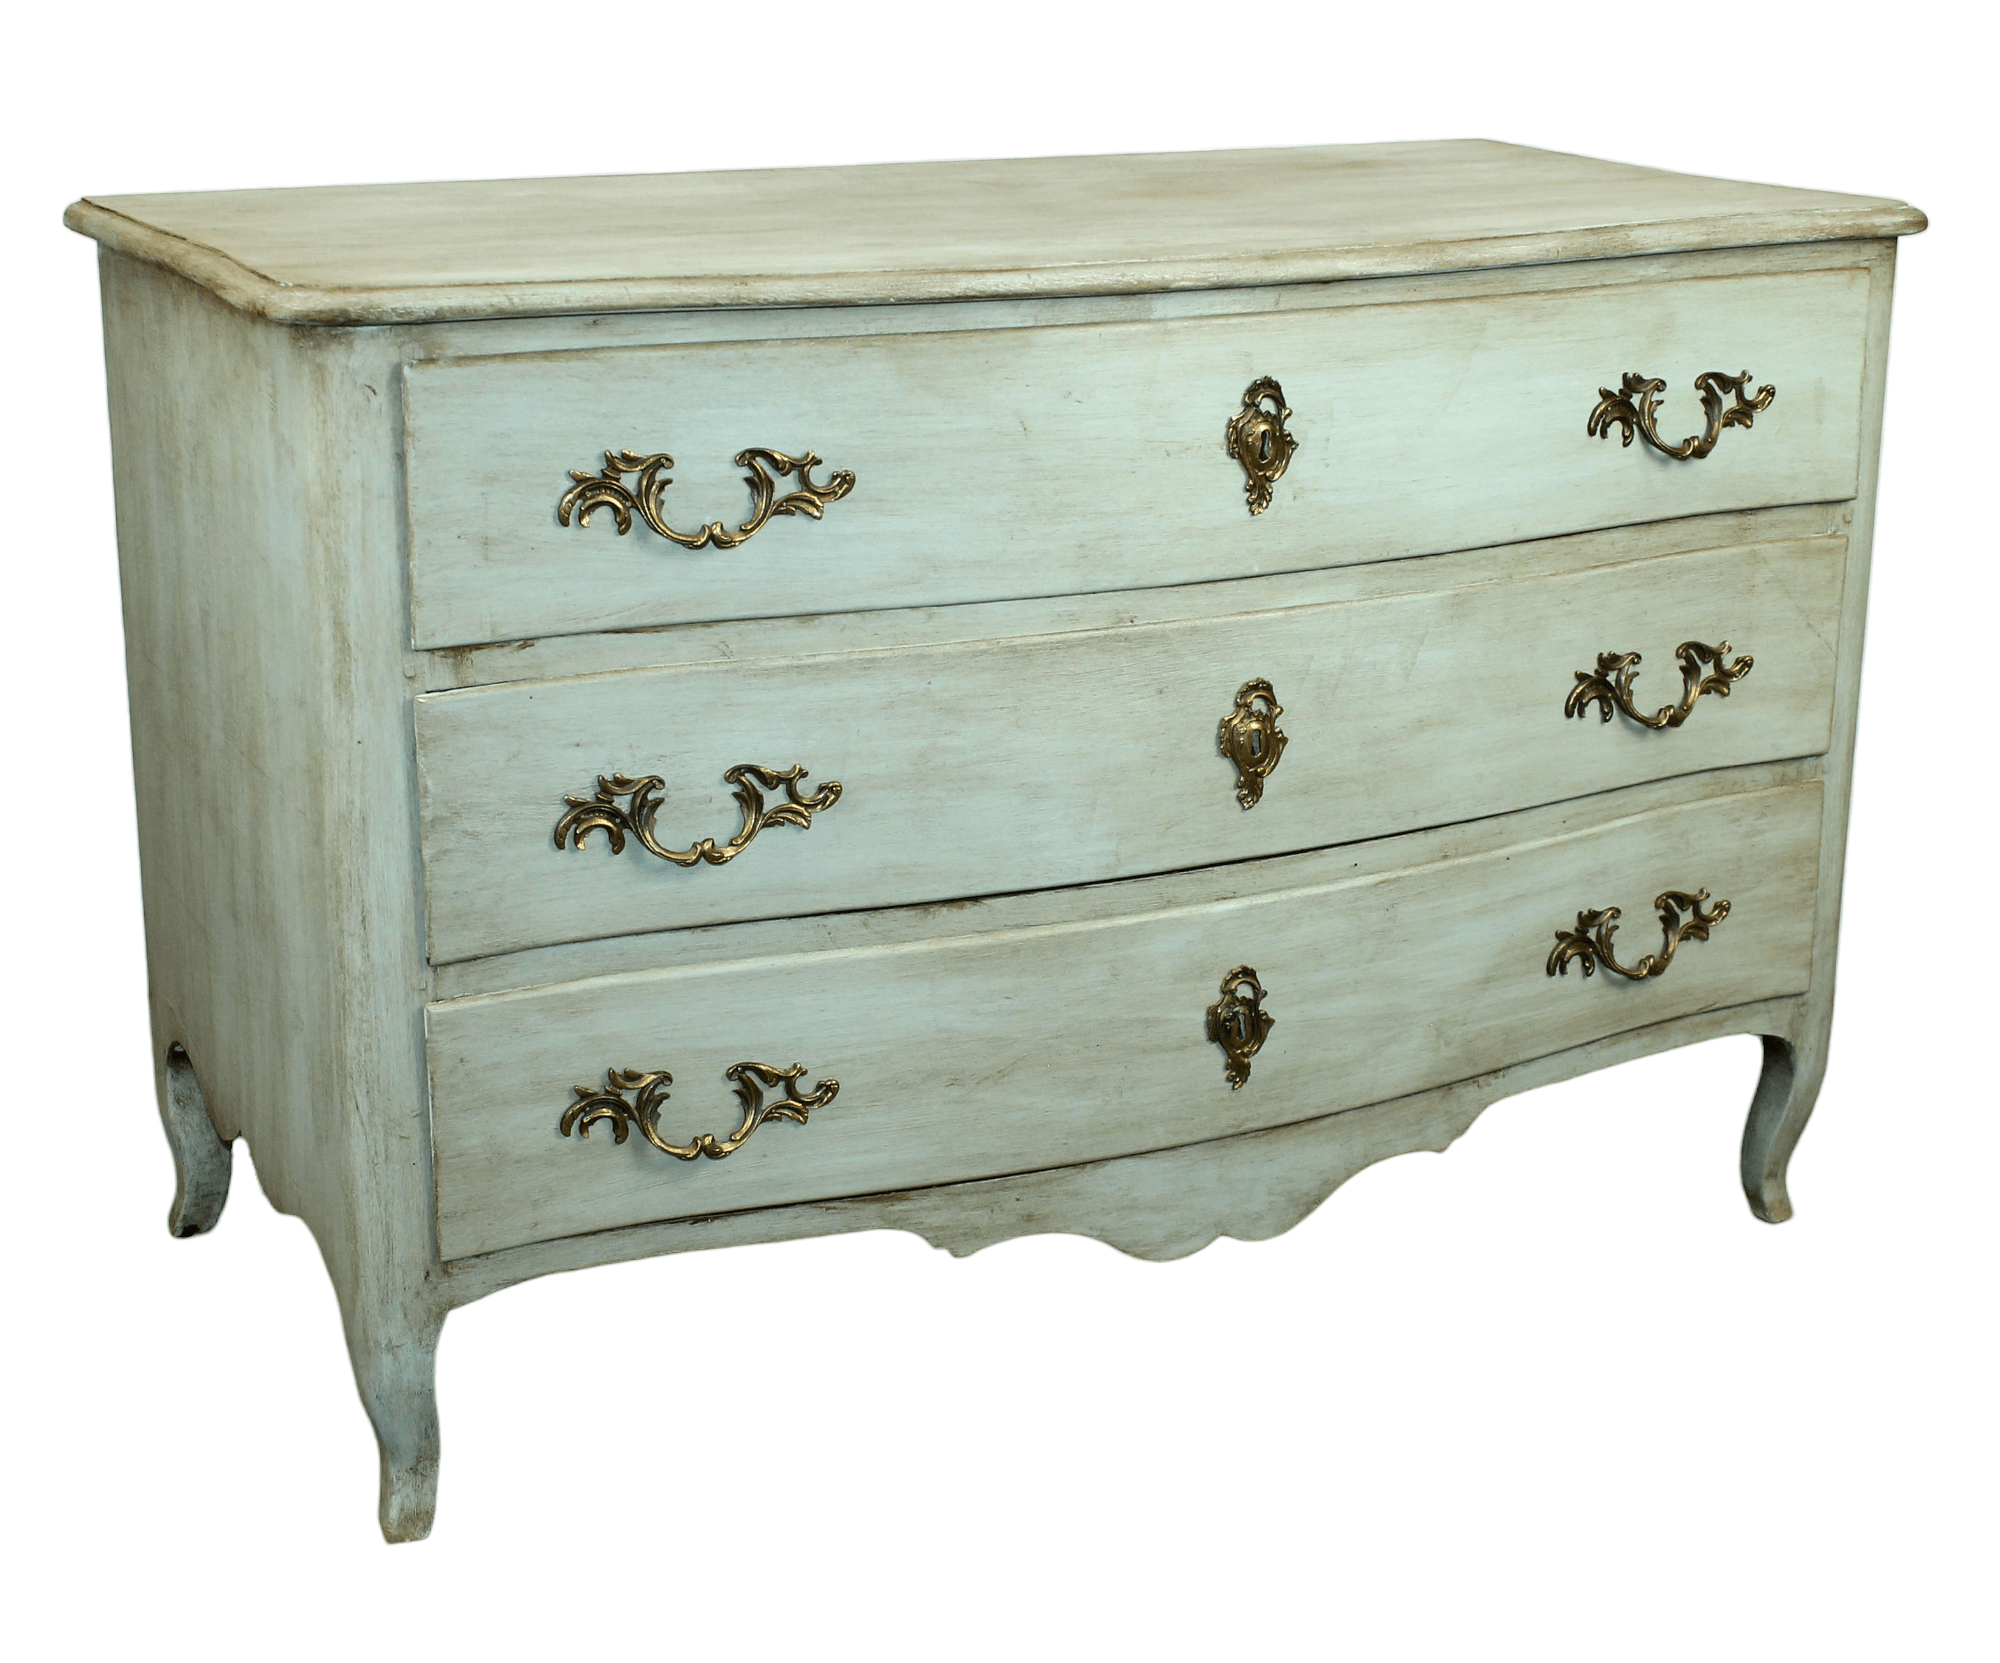 French 18th century Louis XV painted commode